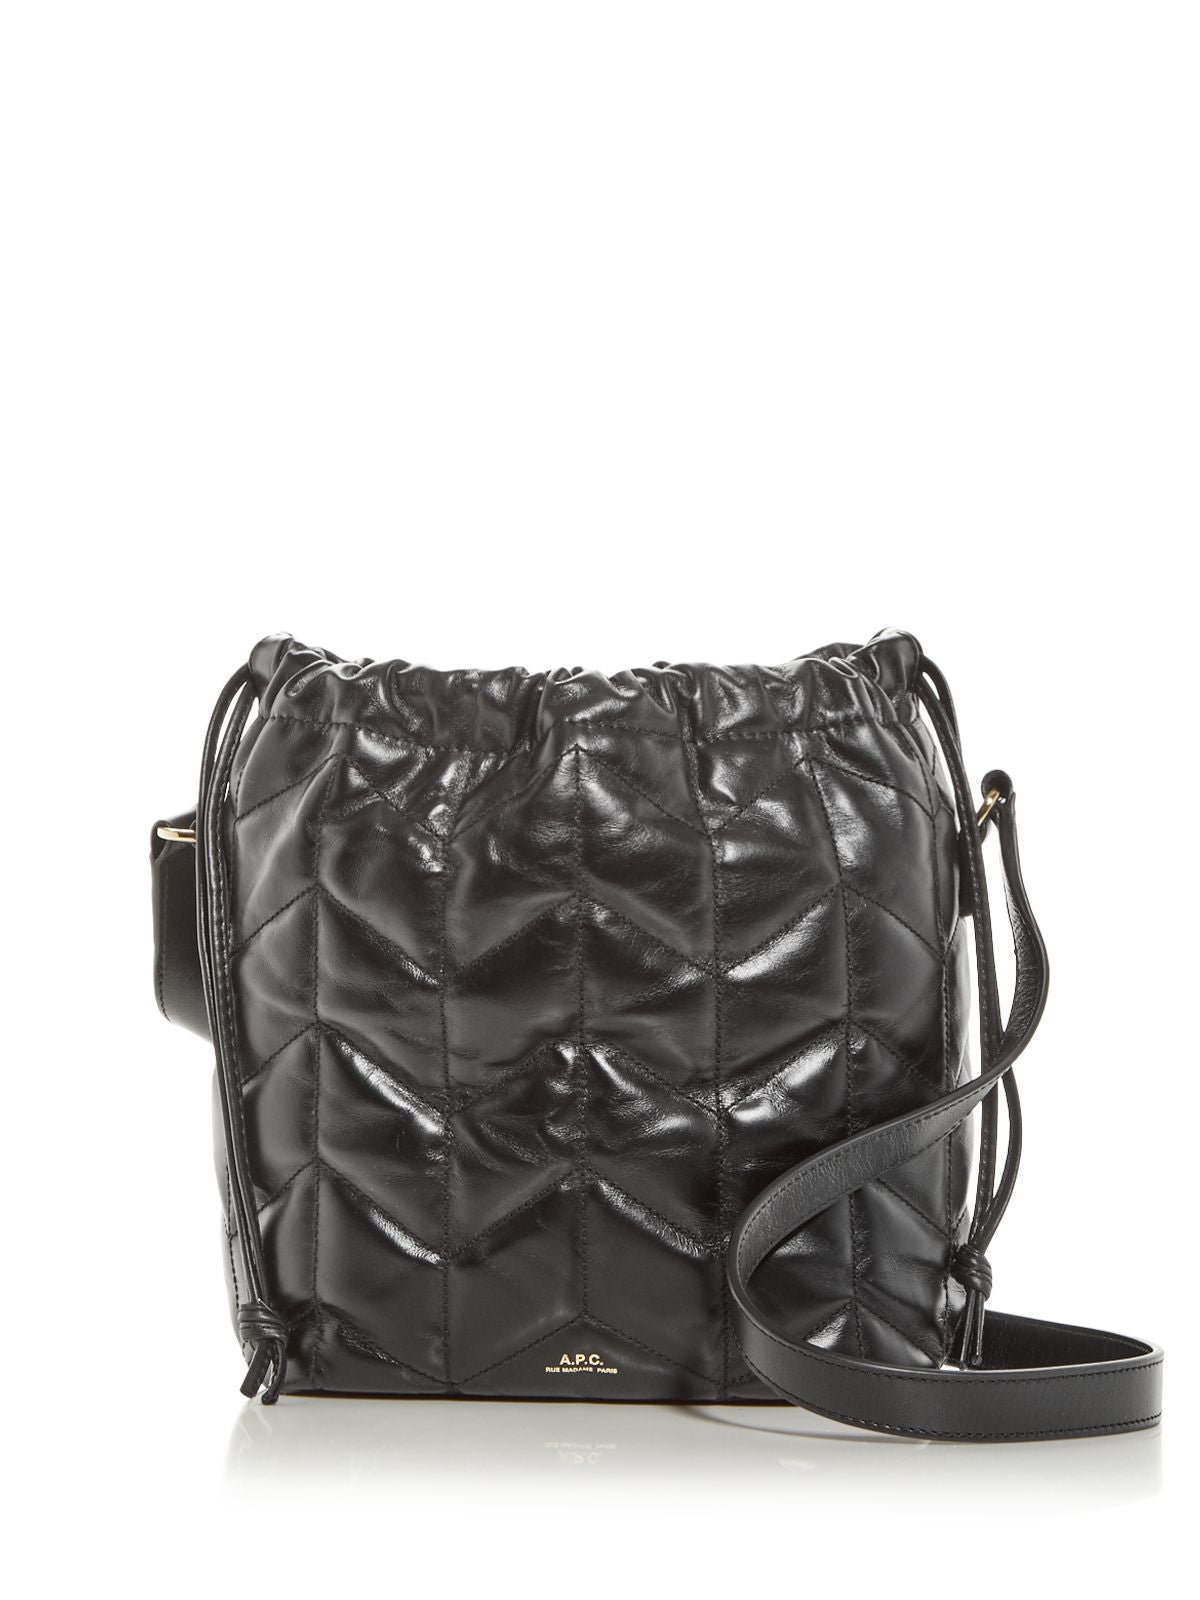 A.P.C. Women's Black Solid Quilted Adjustable Strap Bucket Bag